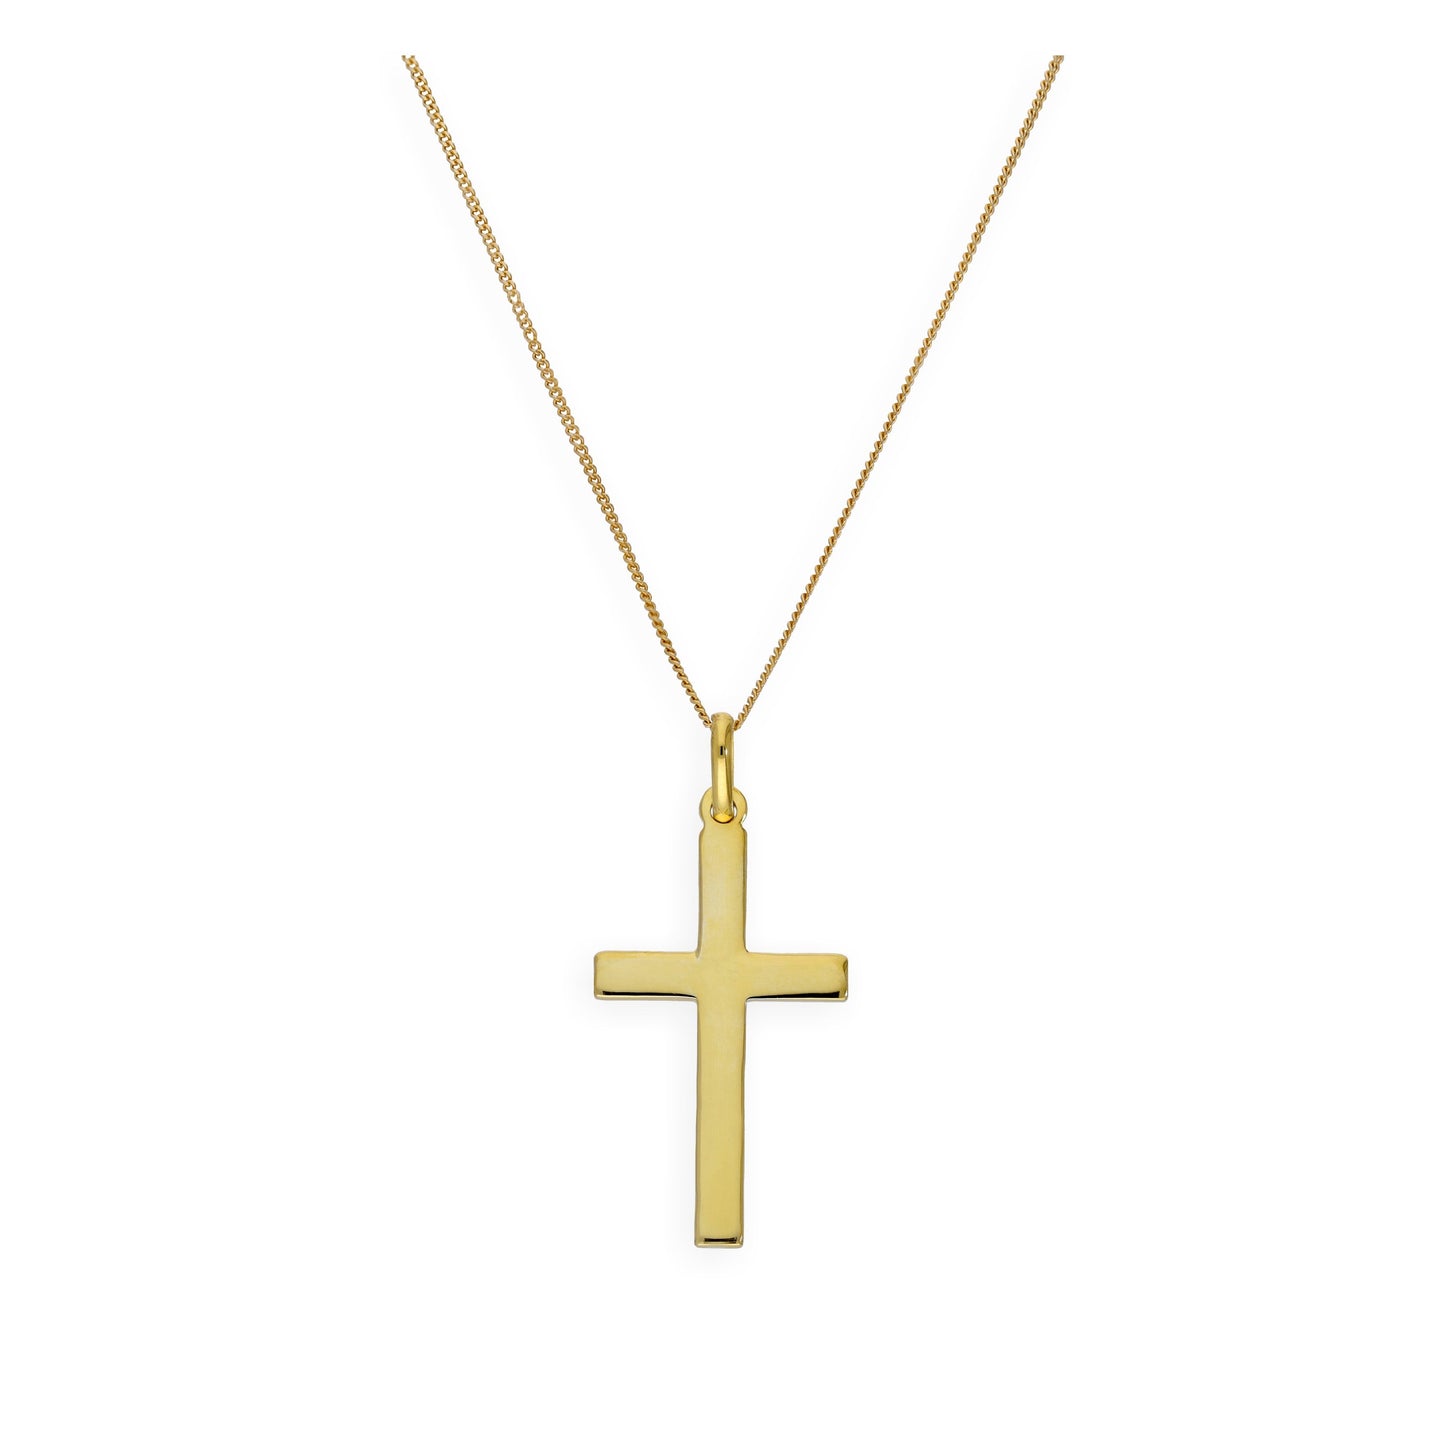 Large Gold Plated Sterling Silver Cross Pendant Necklace 16 - 32 Inches